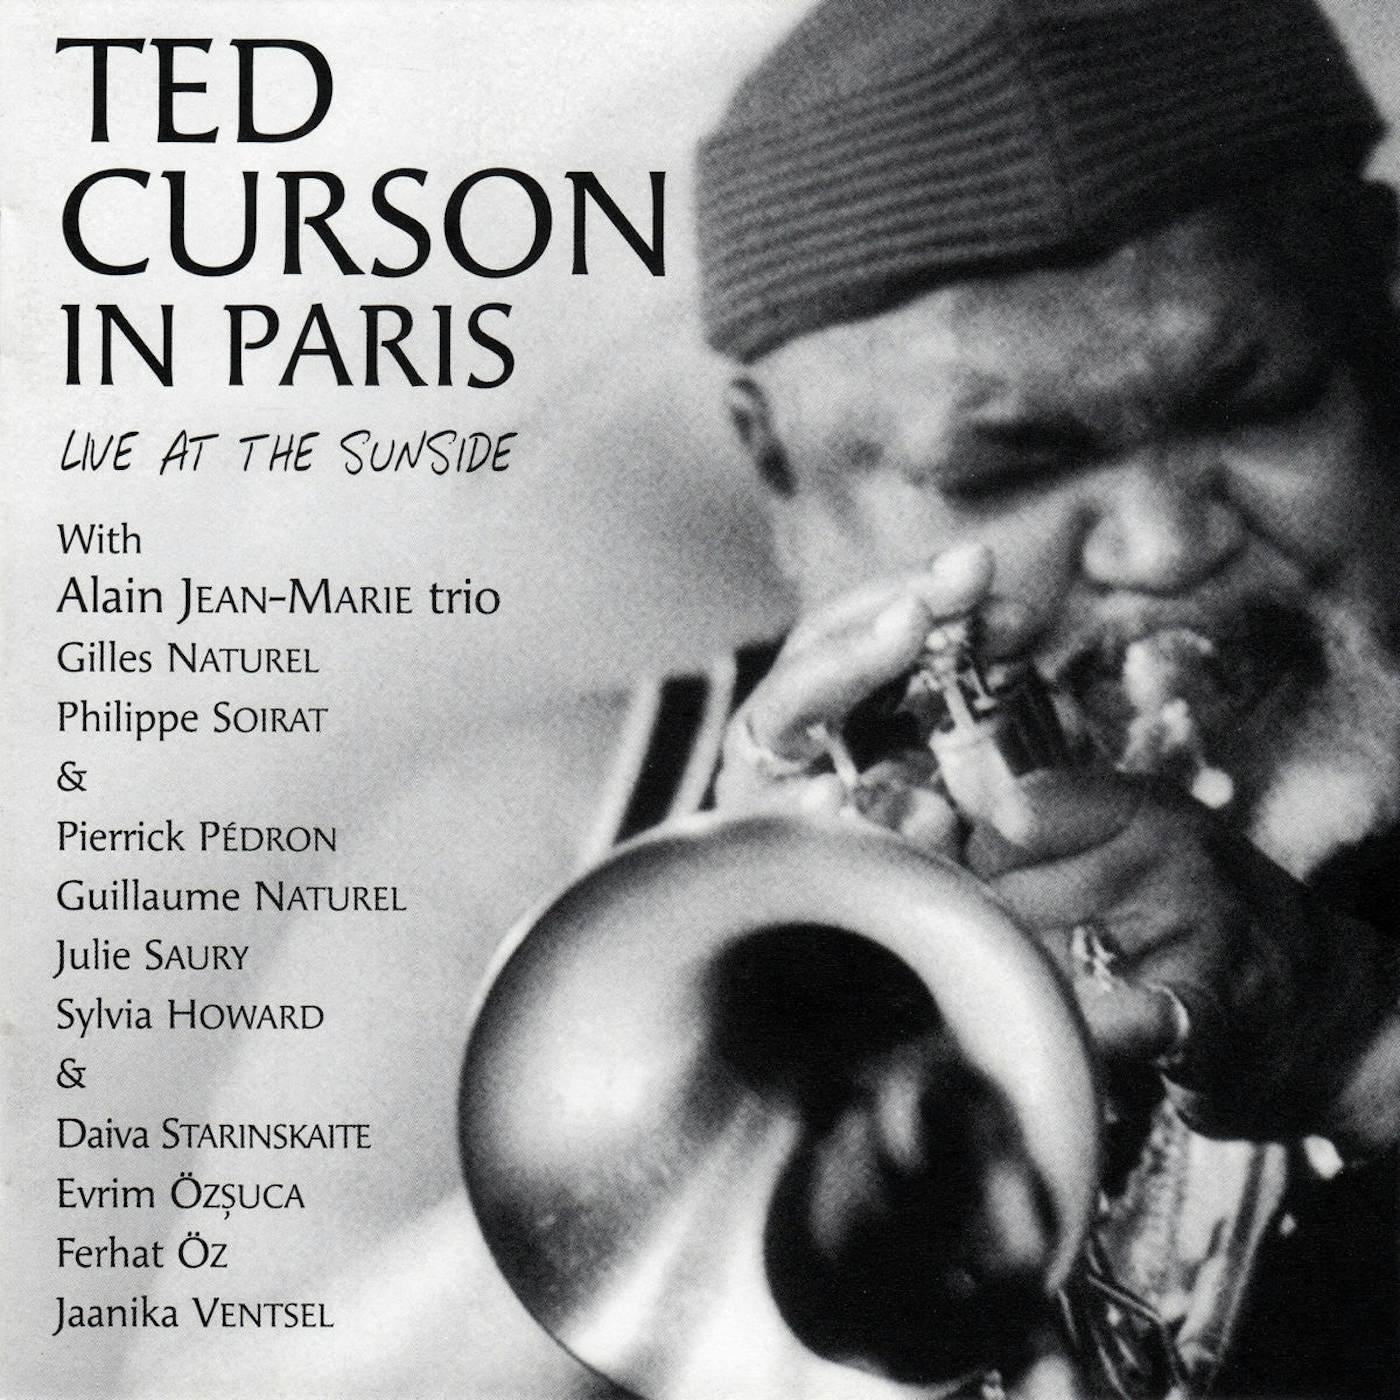 IN PARIS / LIVE AT THE SUNSIDE - TED CURSON (CD)